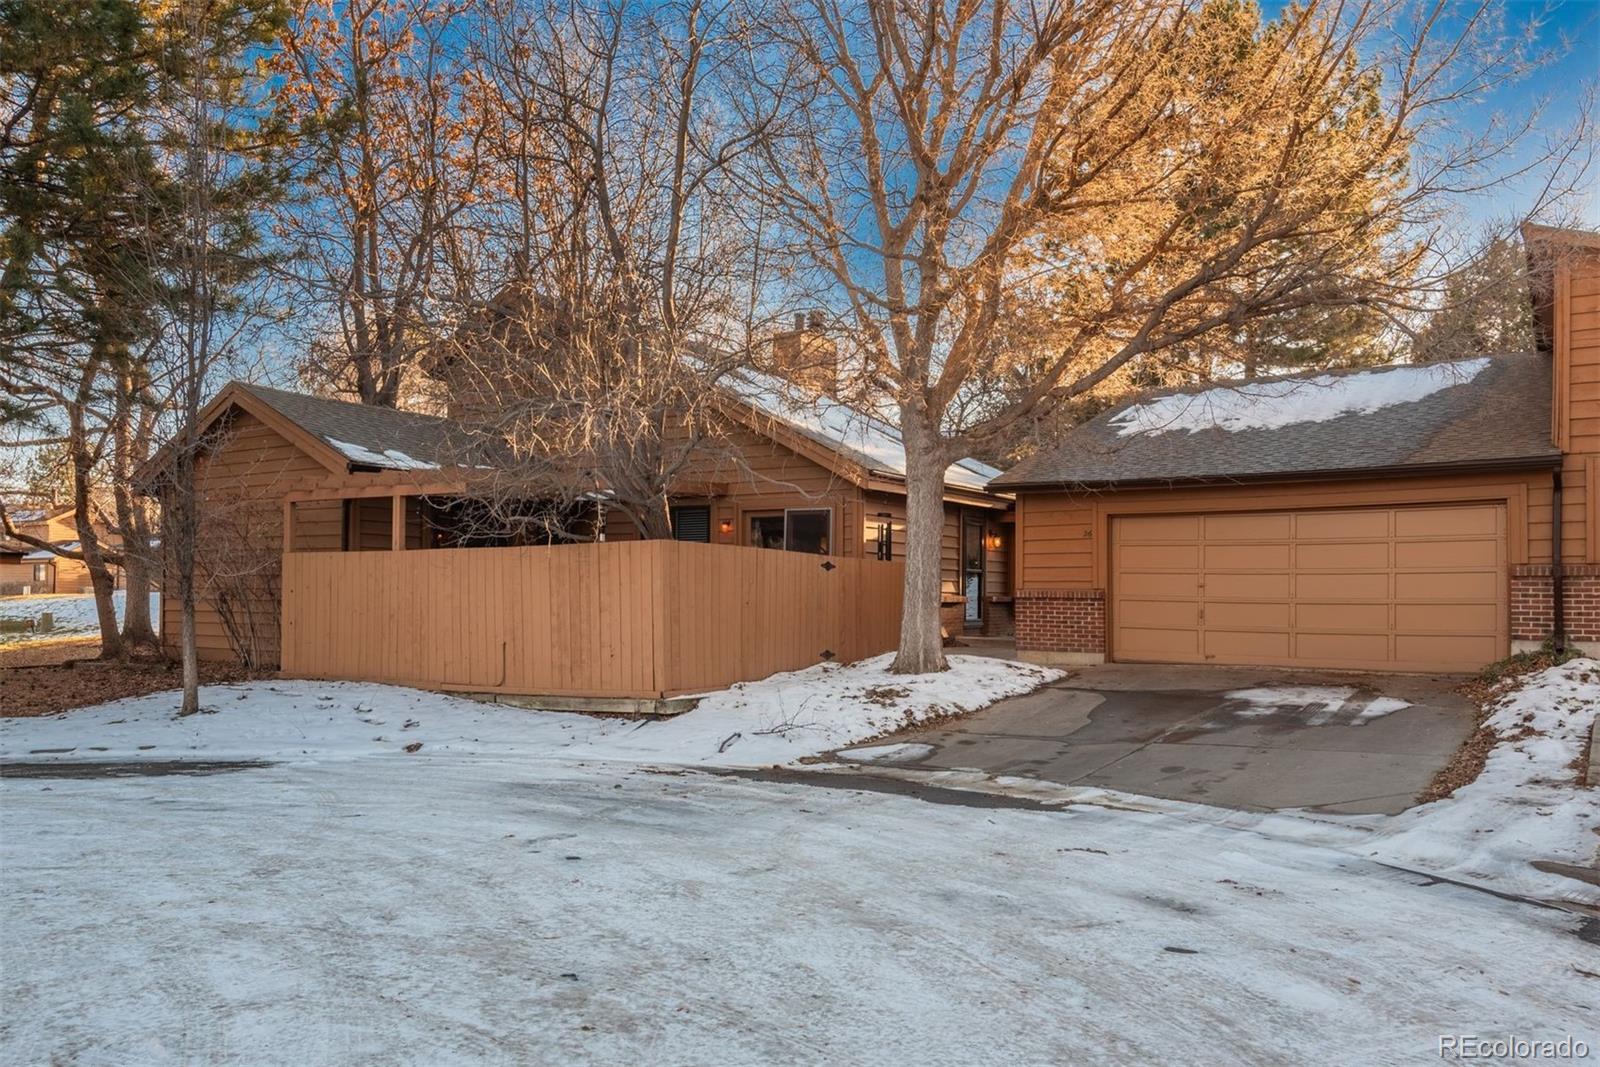 26 s eagle circle, aurora sold home. Closed on 2024-02-12 for $443,000.